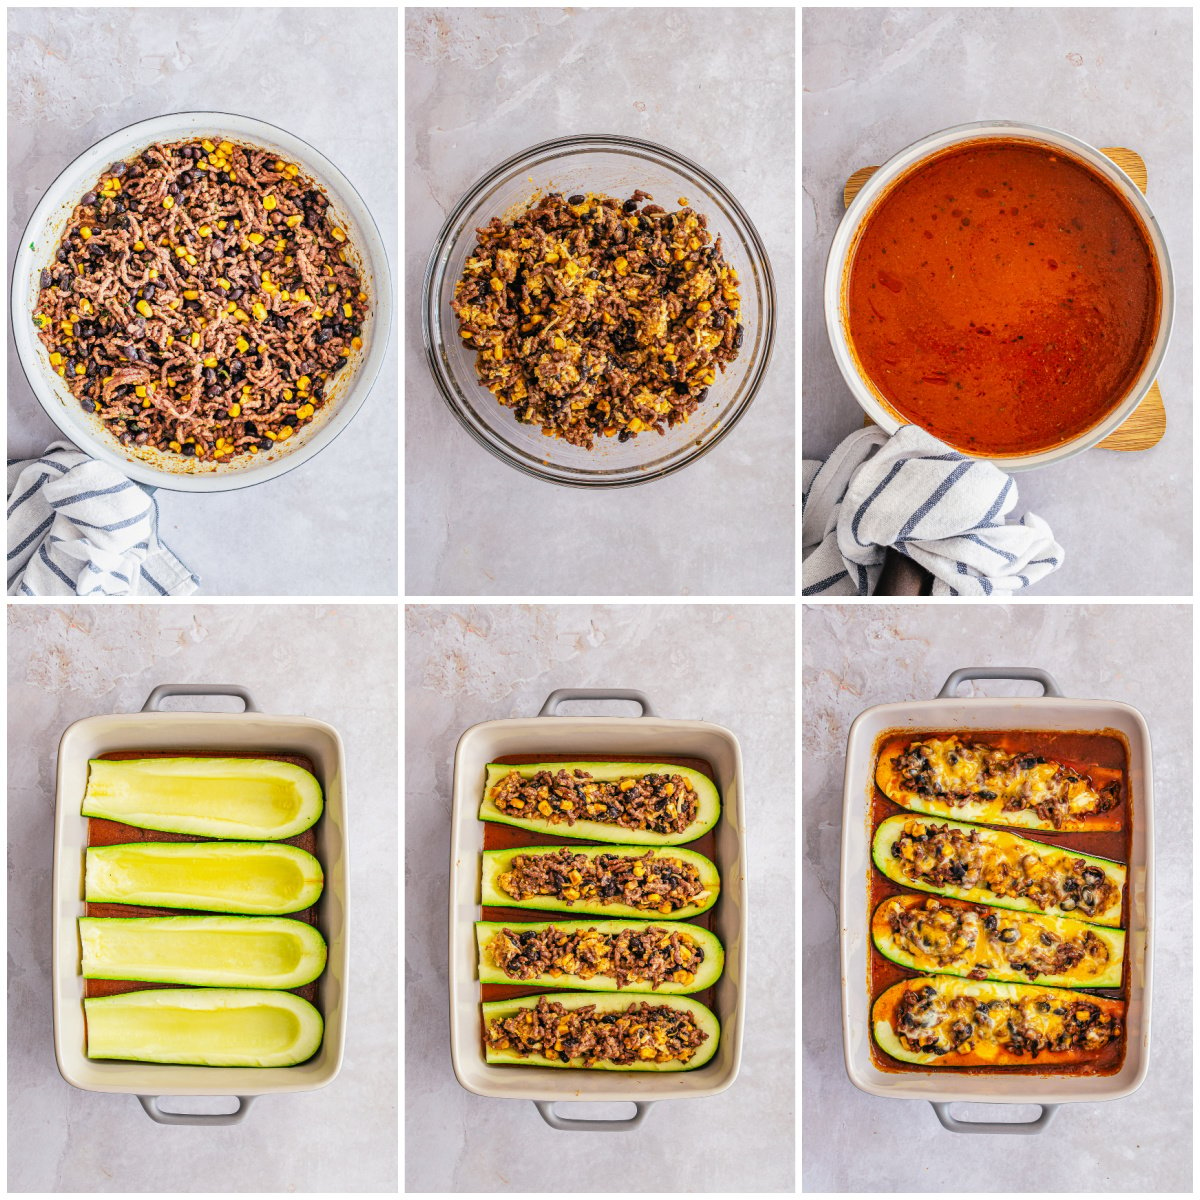 Step by step photos on how to make Enchilada Stuffed Zucchini.